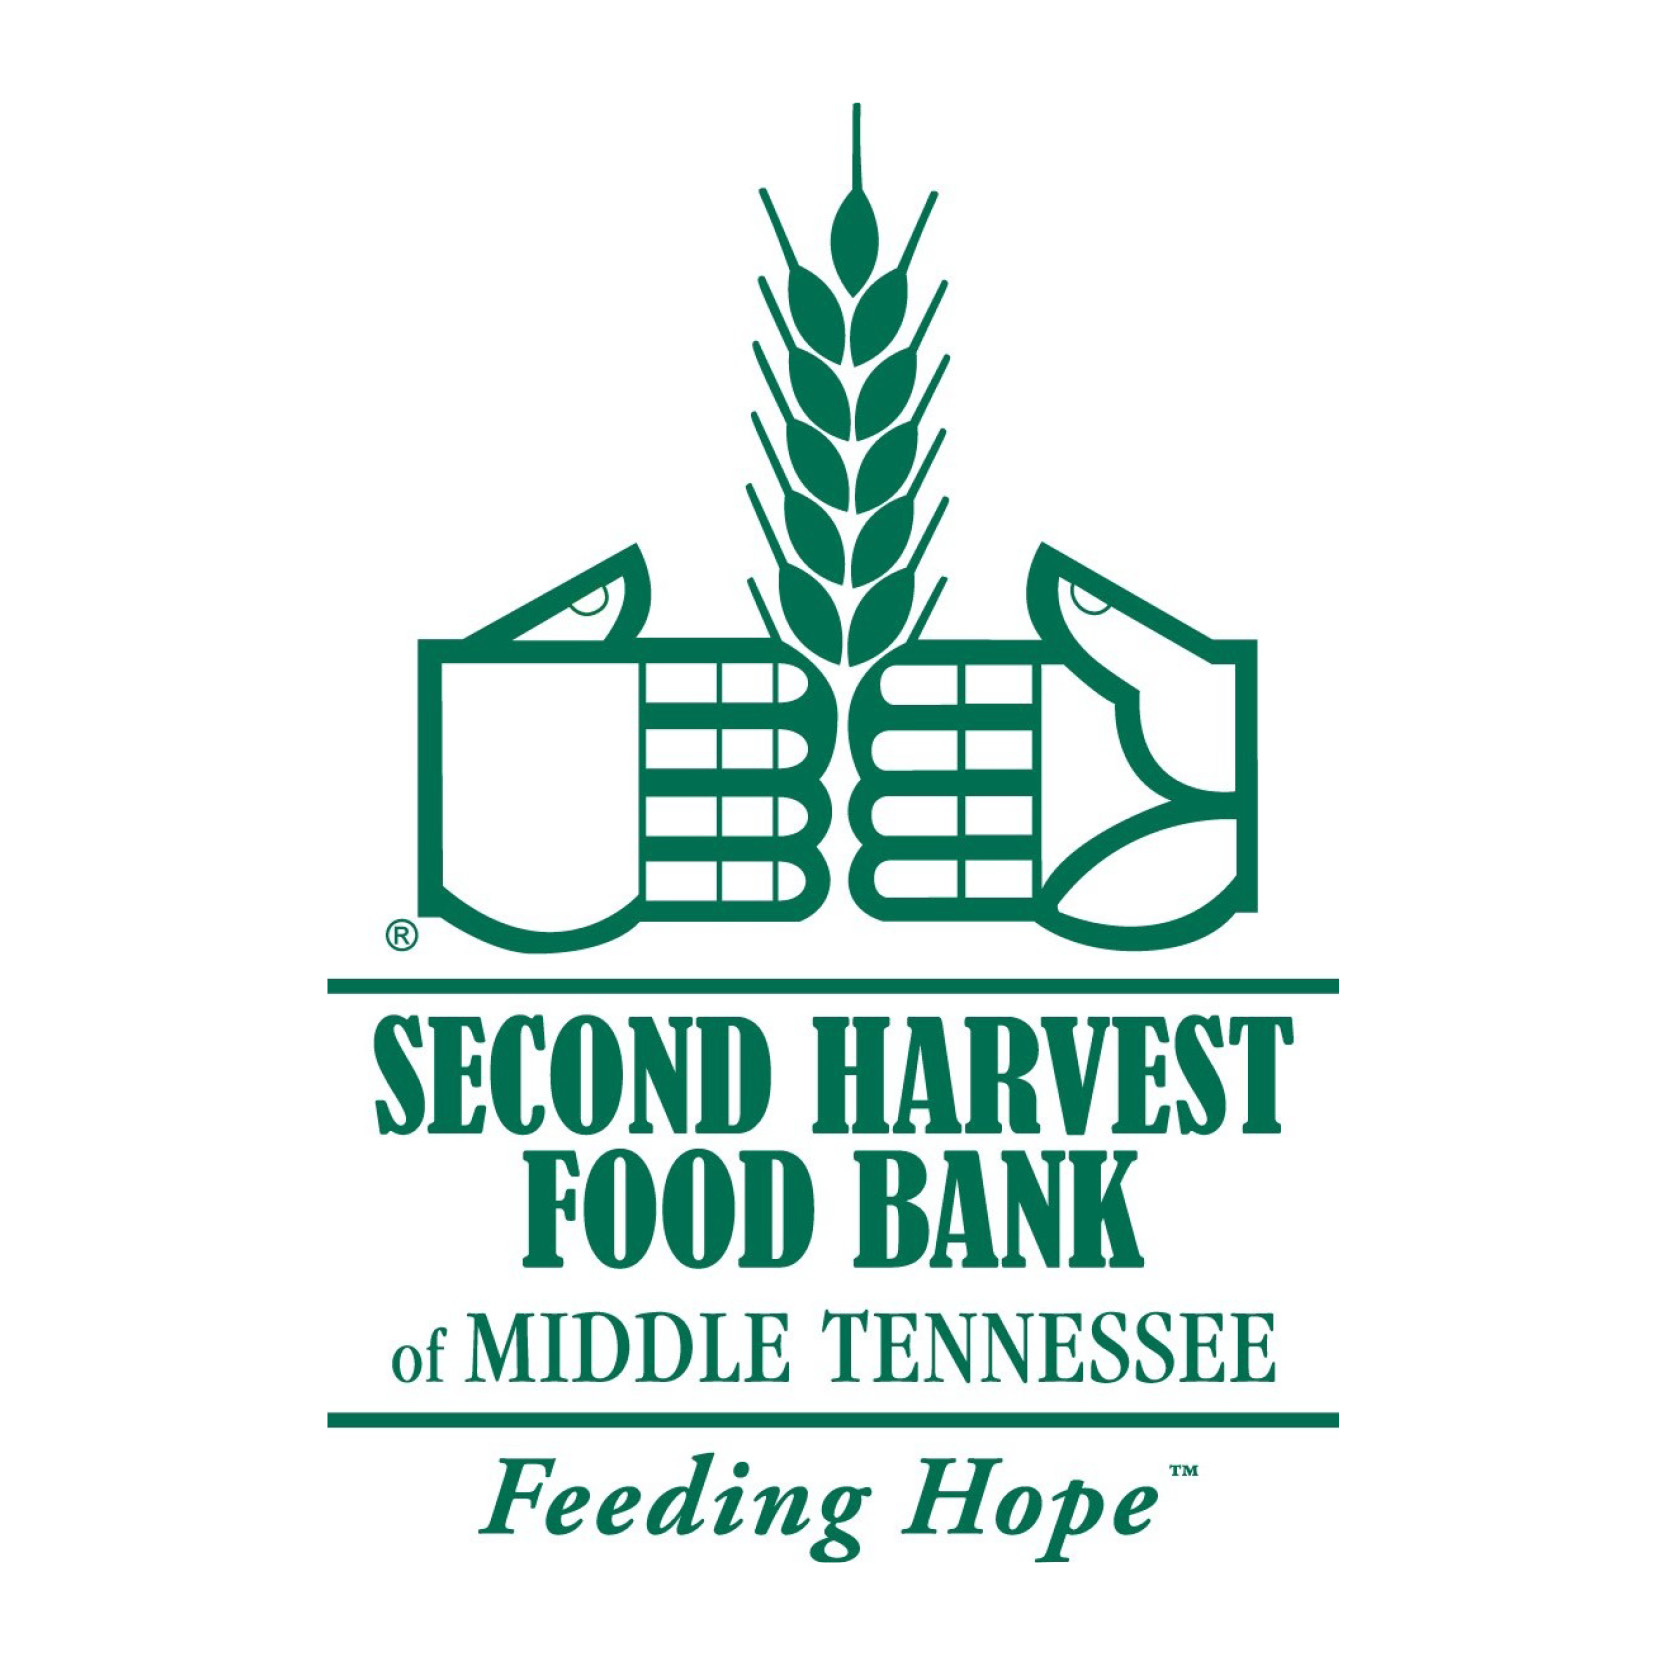 second harvest food bank of northeast tennessee